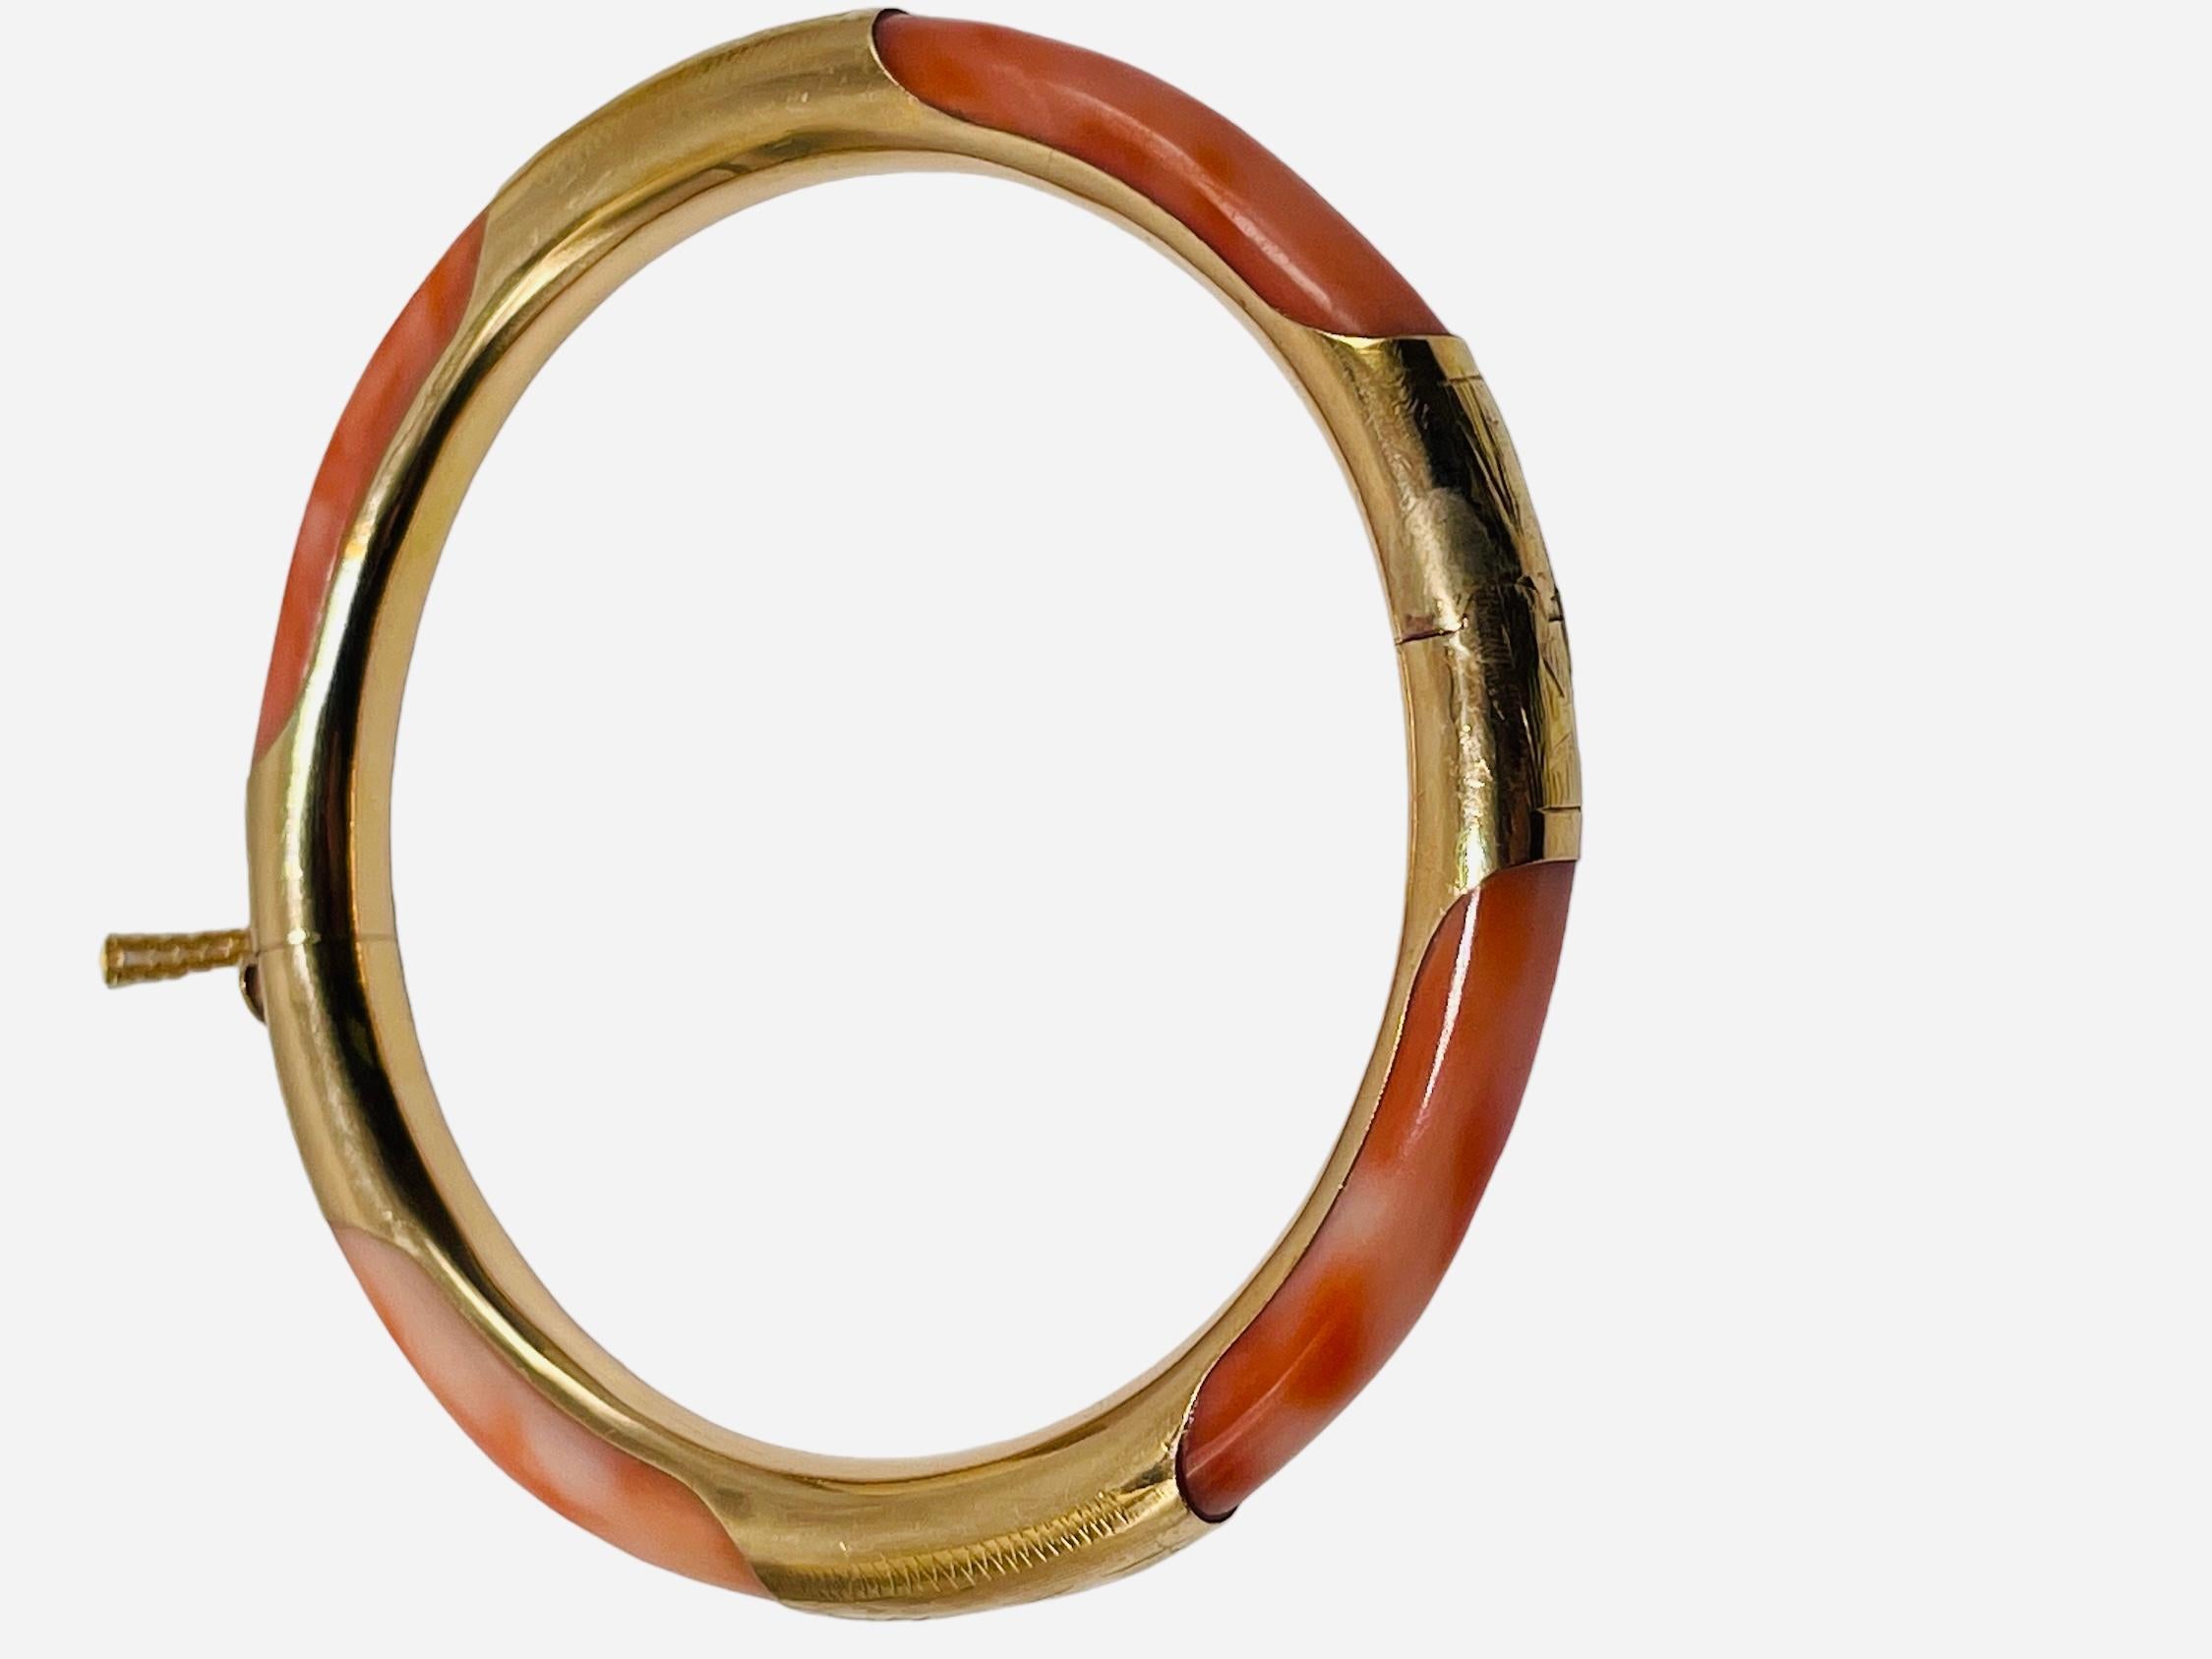 This is a 14K gold Coral hinged bangle/bracelet. It depicts a Pink Coral bangle adorned with bands of gold engraved with some branches of leaves. The bracelet has a cylindrical box closure with a heart clasp and safety chain. It is hallmarked 585